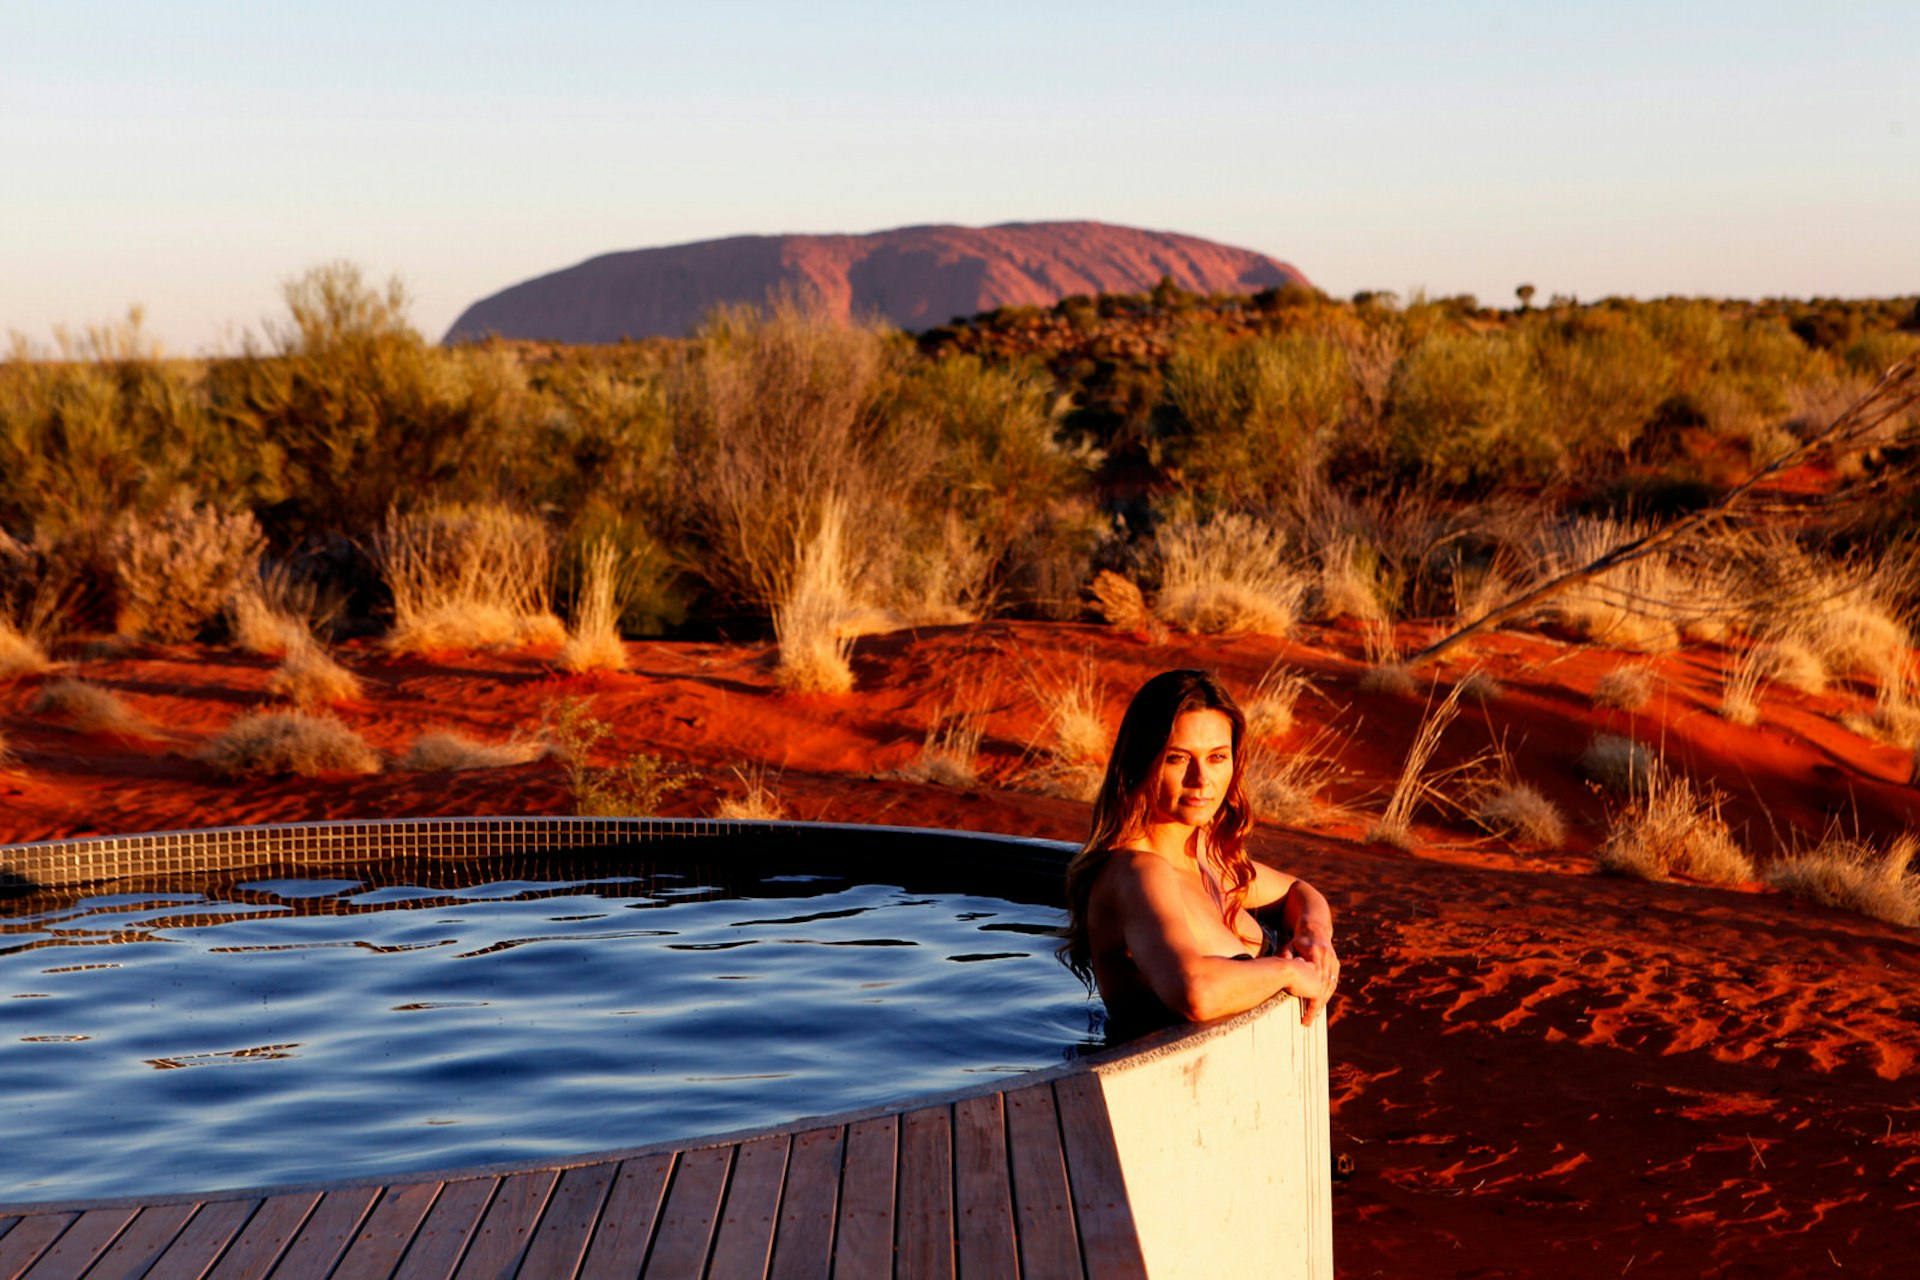 A woman sits in a hot tub with Australia's Uluru in the background.